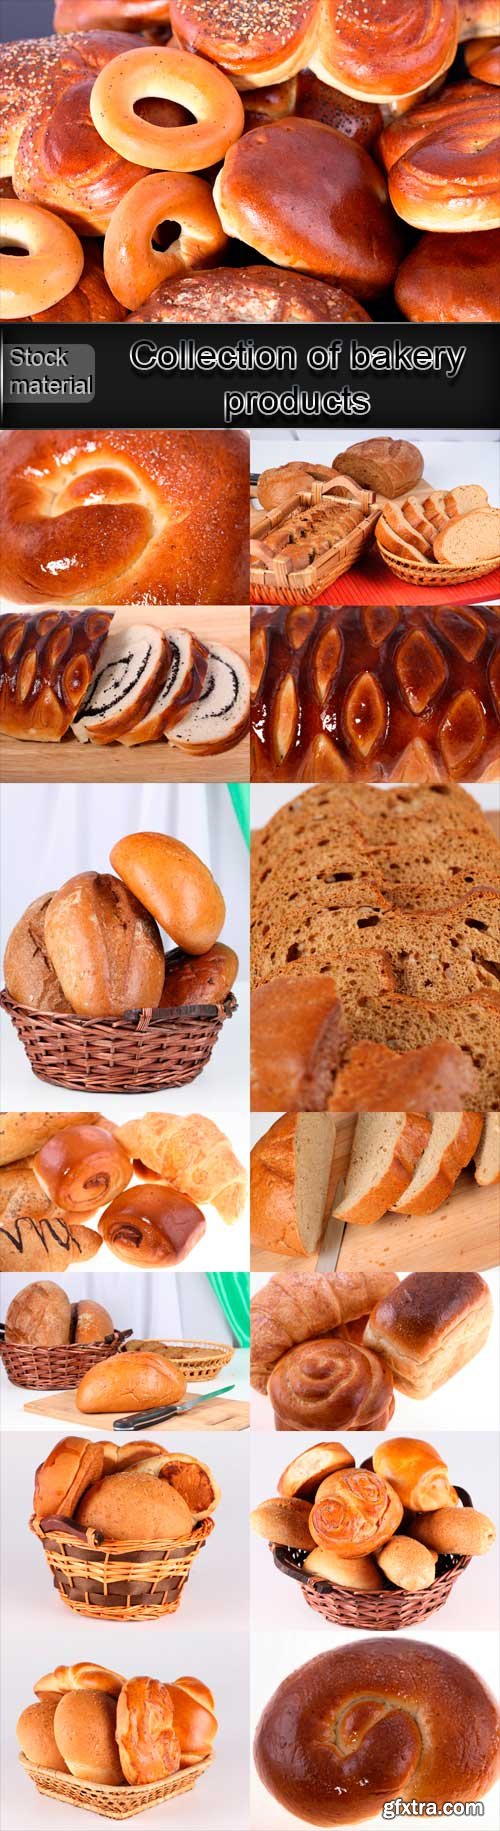 Collection of bakery products